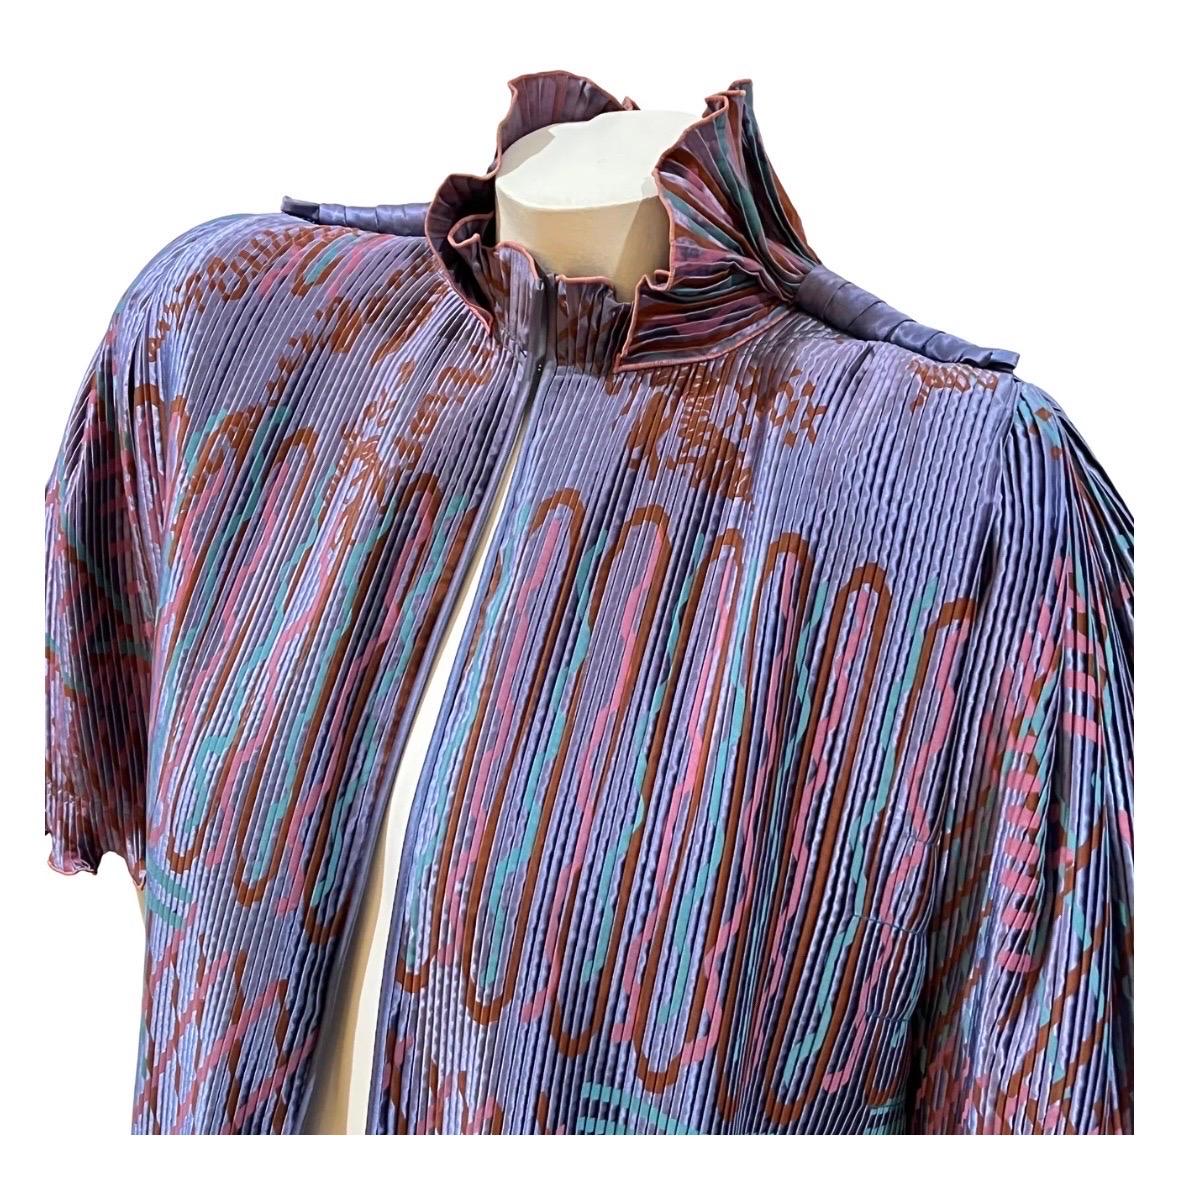 Pleated capelet top by Zandra Rhodes
Circa 1980's
Made in England
Periwinkle w/ turquoise, pink and orange line designs throughout 
Pleated fabric 
Ruffled collar and hems
Single hook closure at neck 
Short, fan sleeves
Shoulder pads 
Side slits